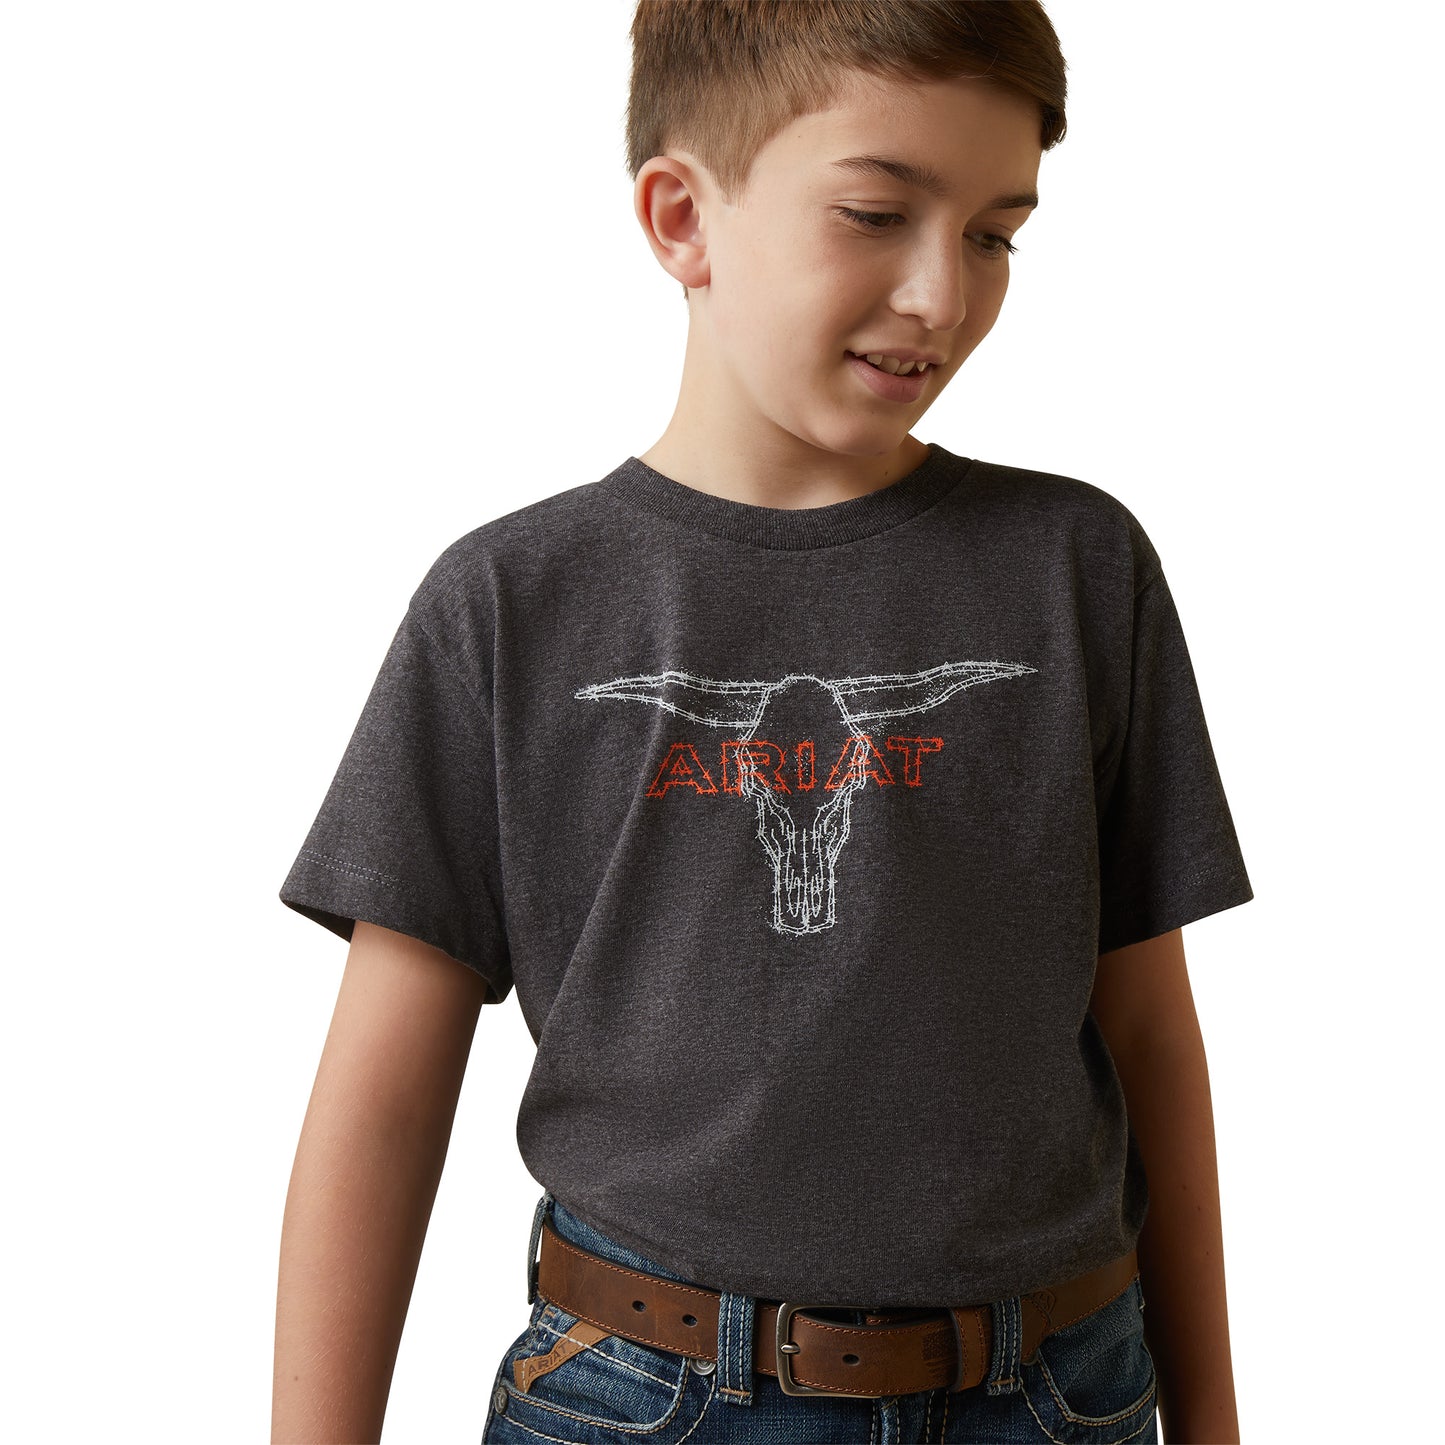 Ariat® Youth Boy's Barbed Wire Steer Charcoal Heather T-Shirt 10044750